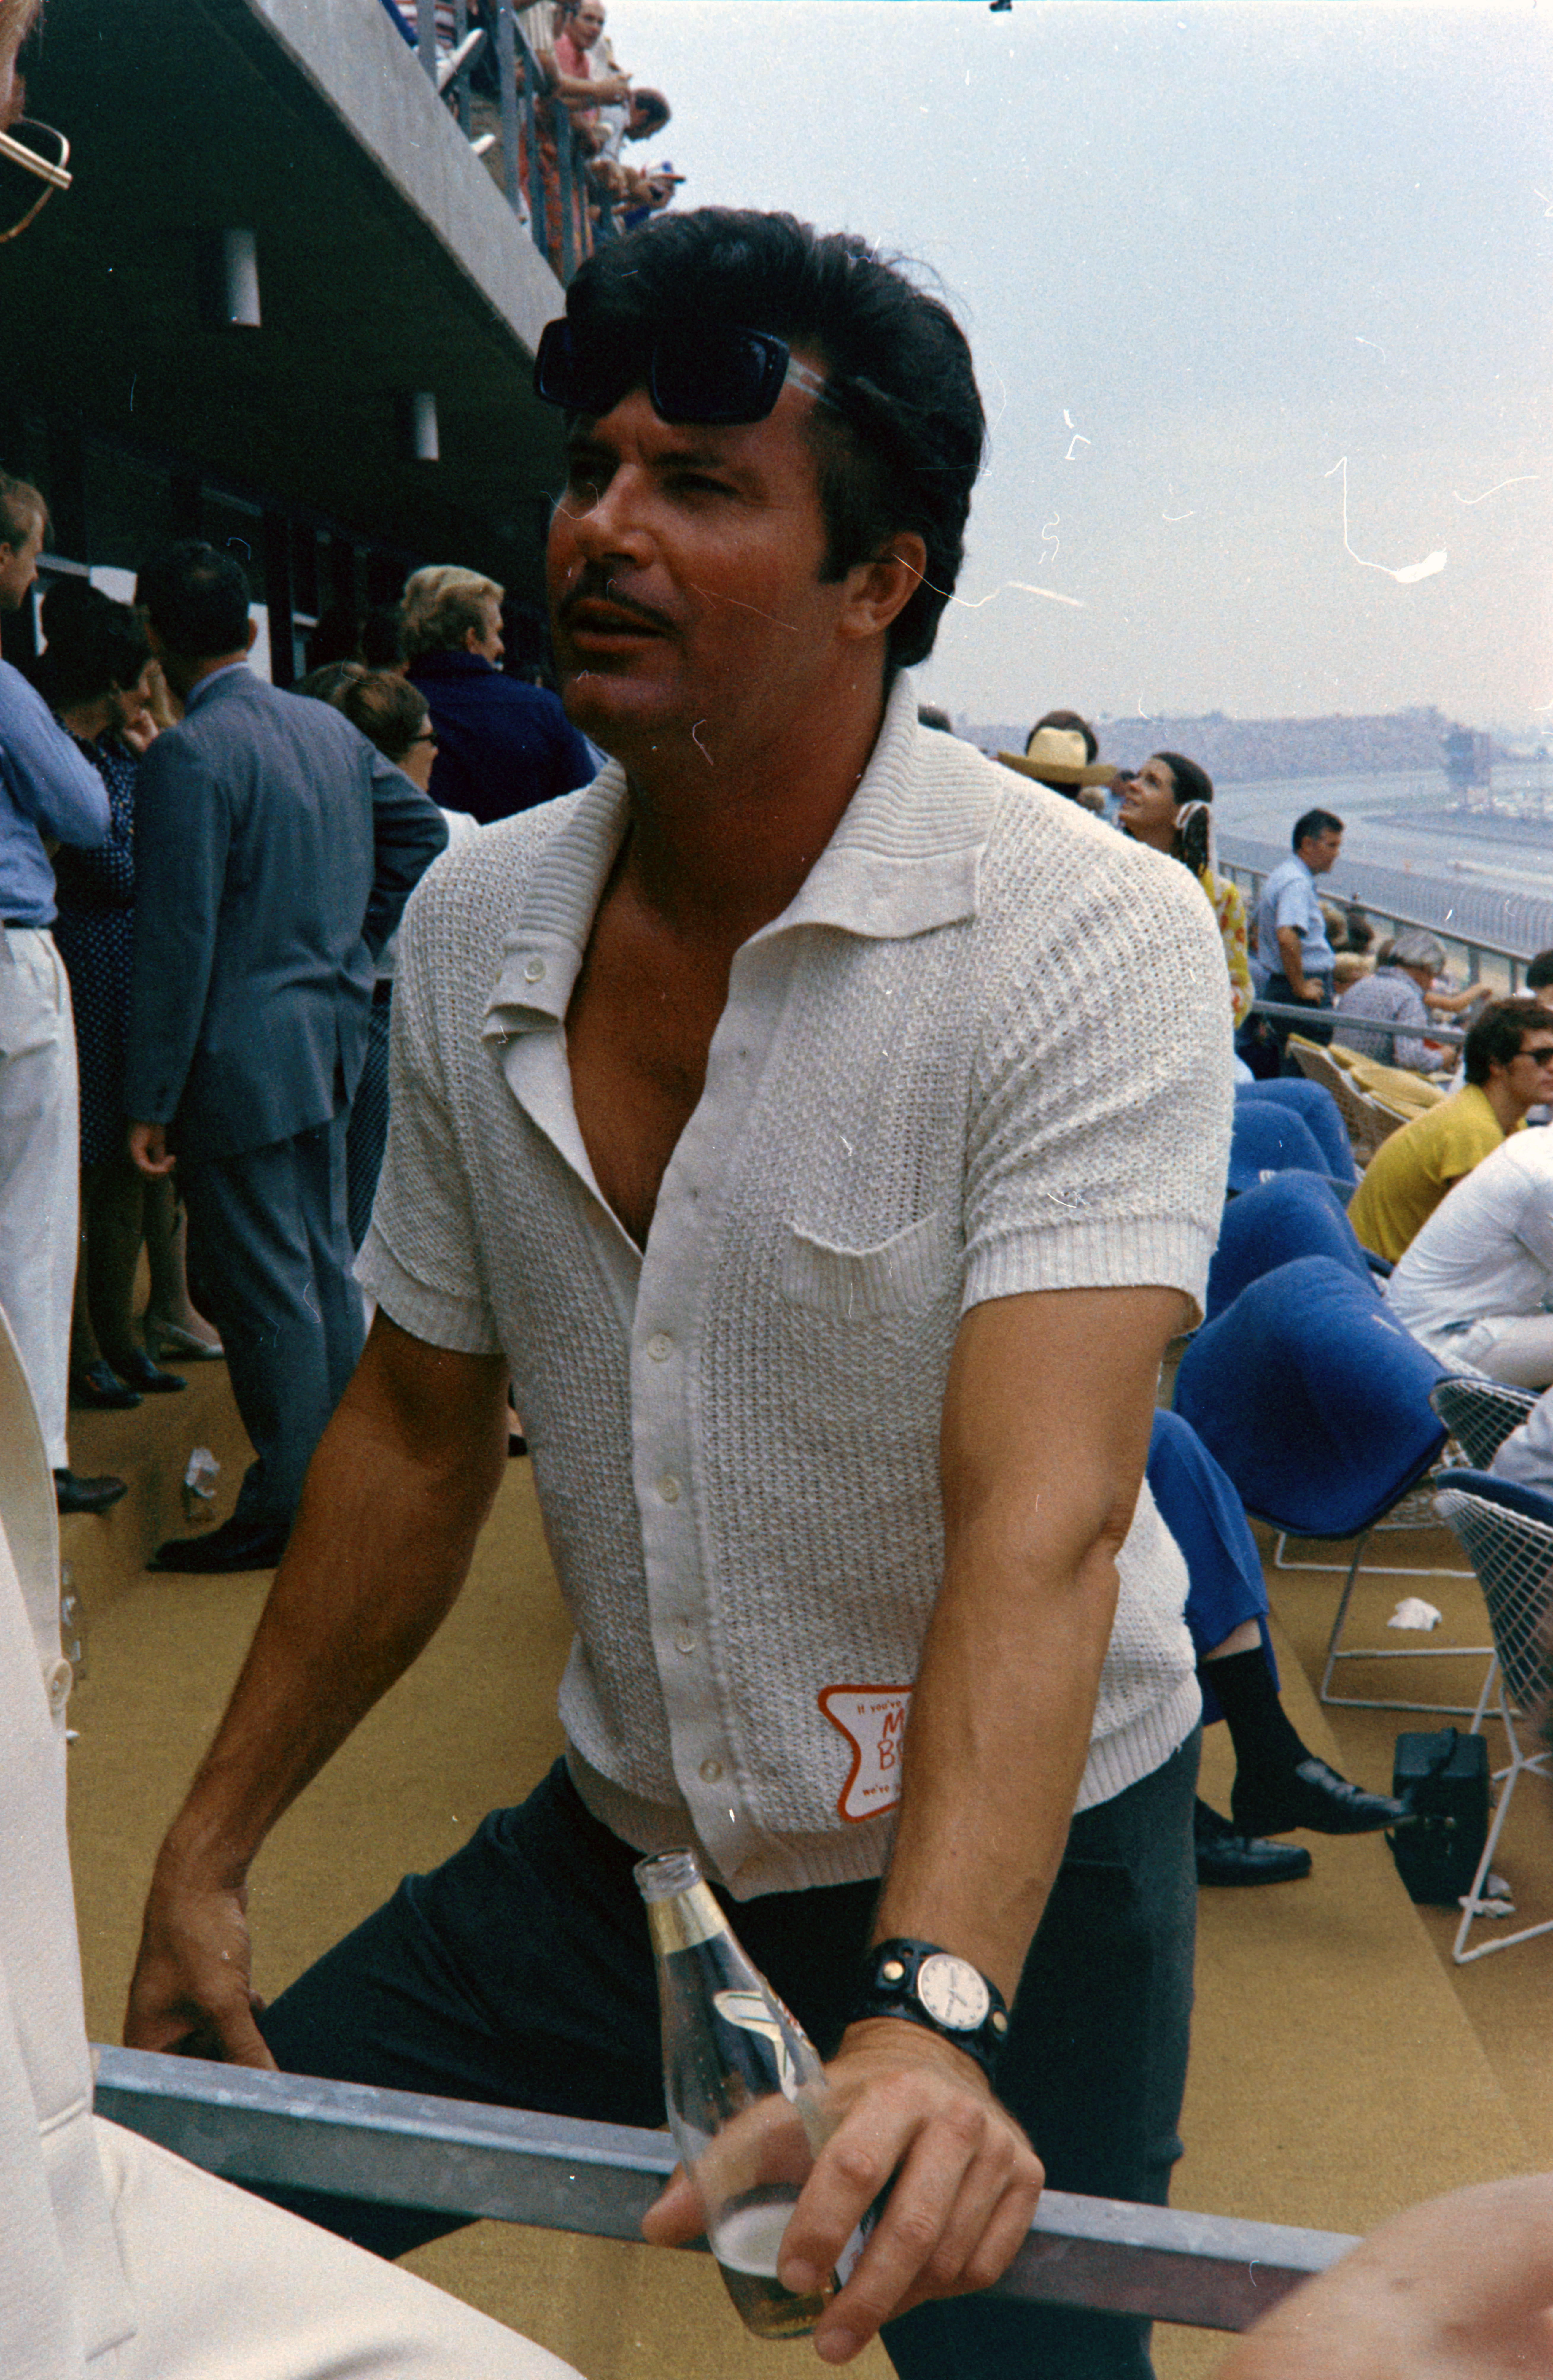 Max Baer Jr. at the California 500 Race in 1972. | Source: Getty Images